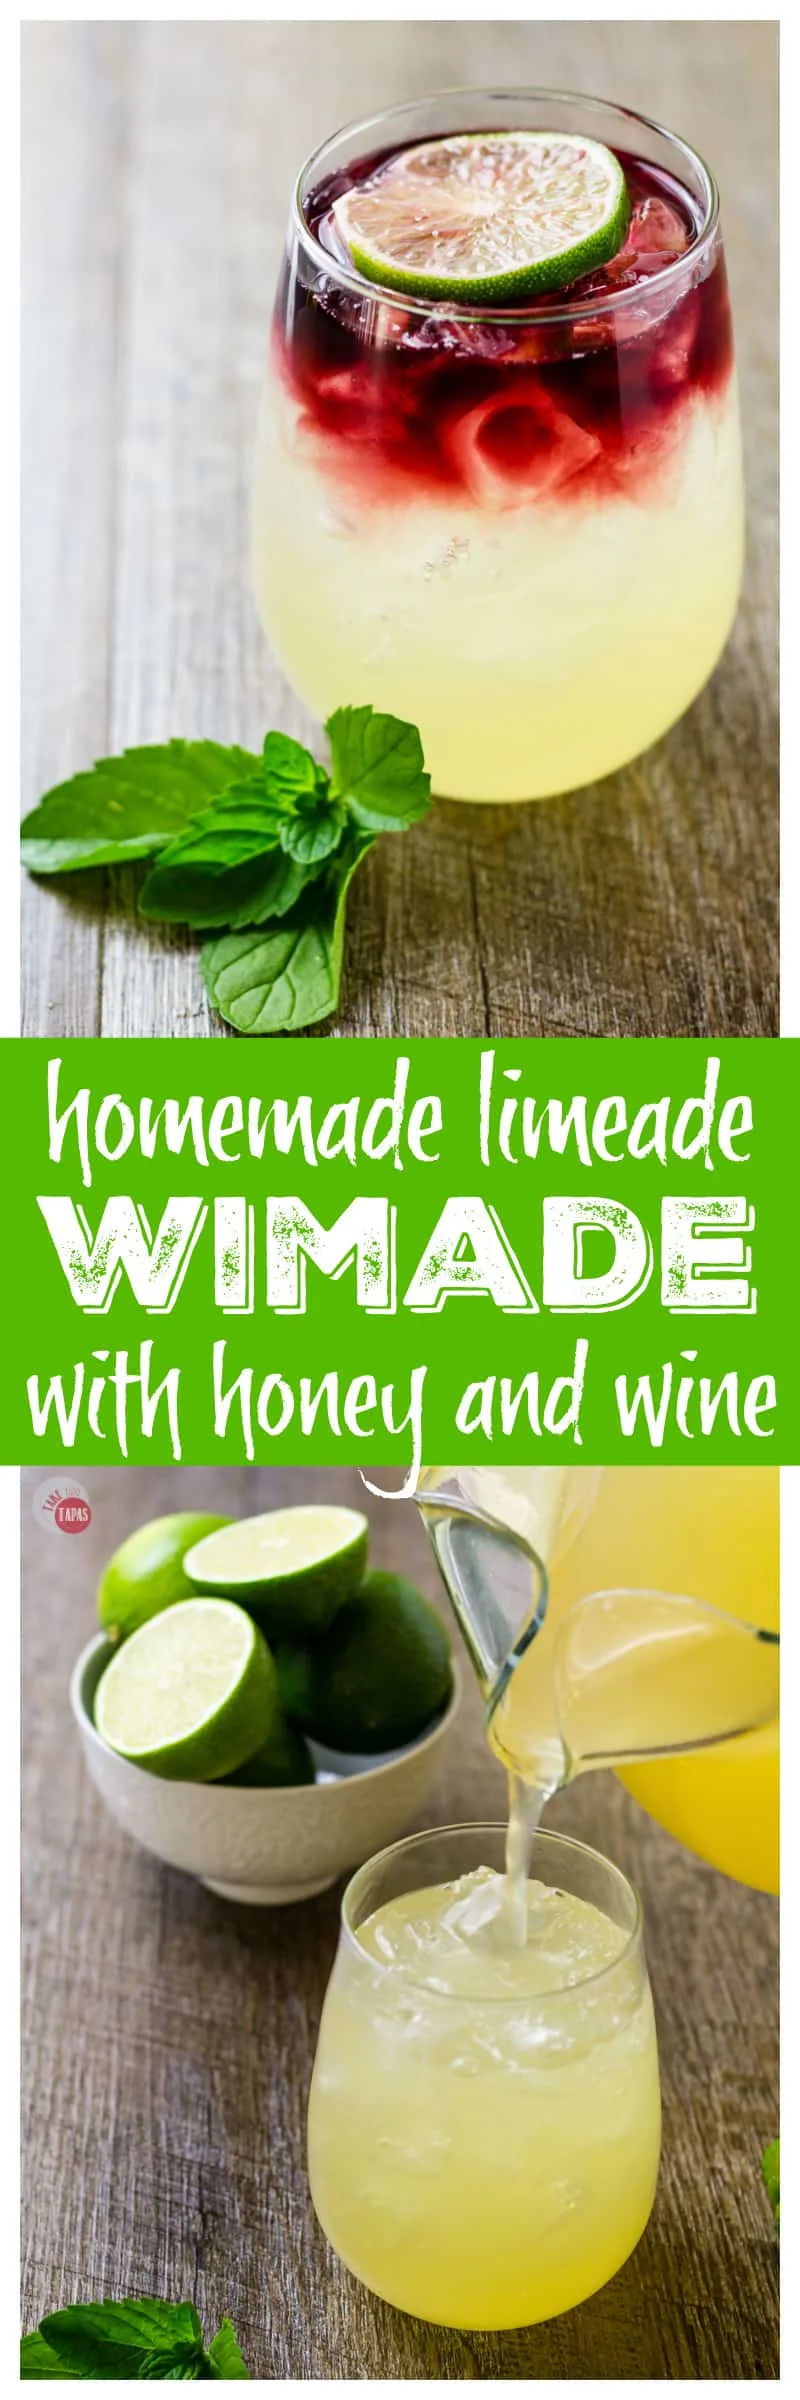 Pinterest collage image with text "homemade limeade wimade with honey and wine"